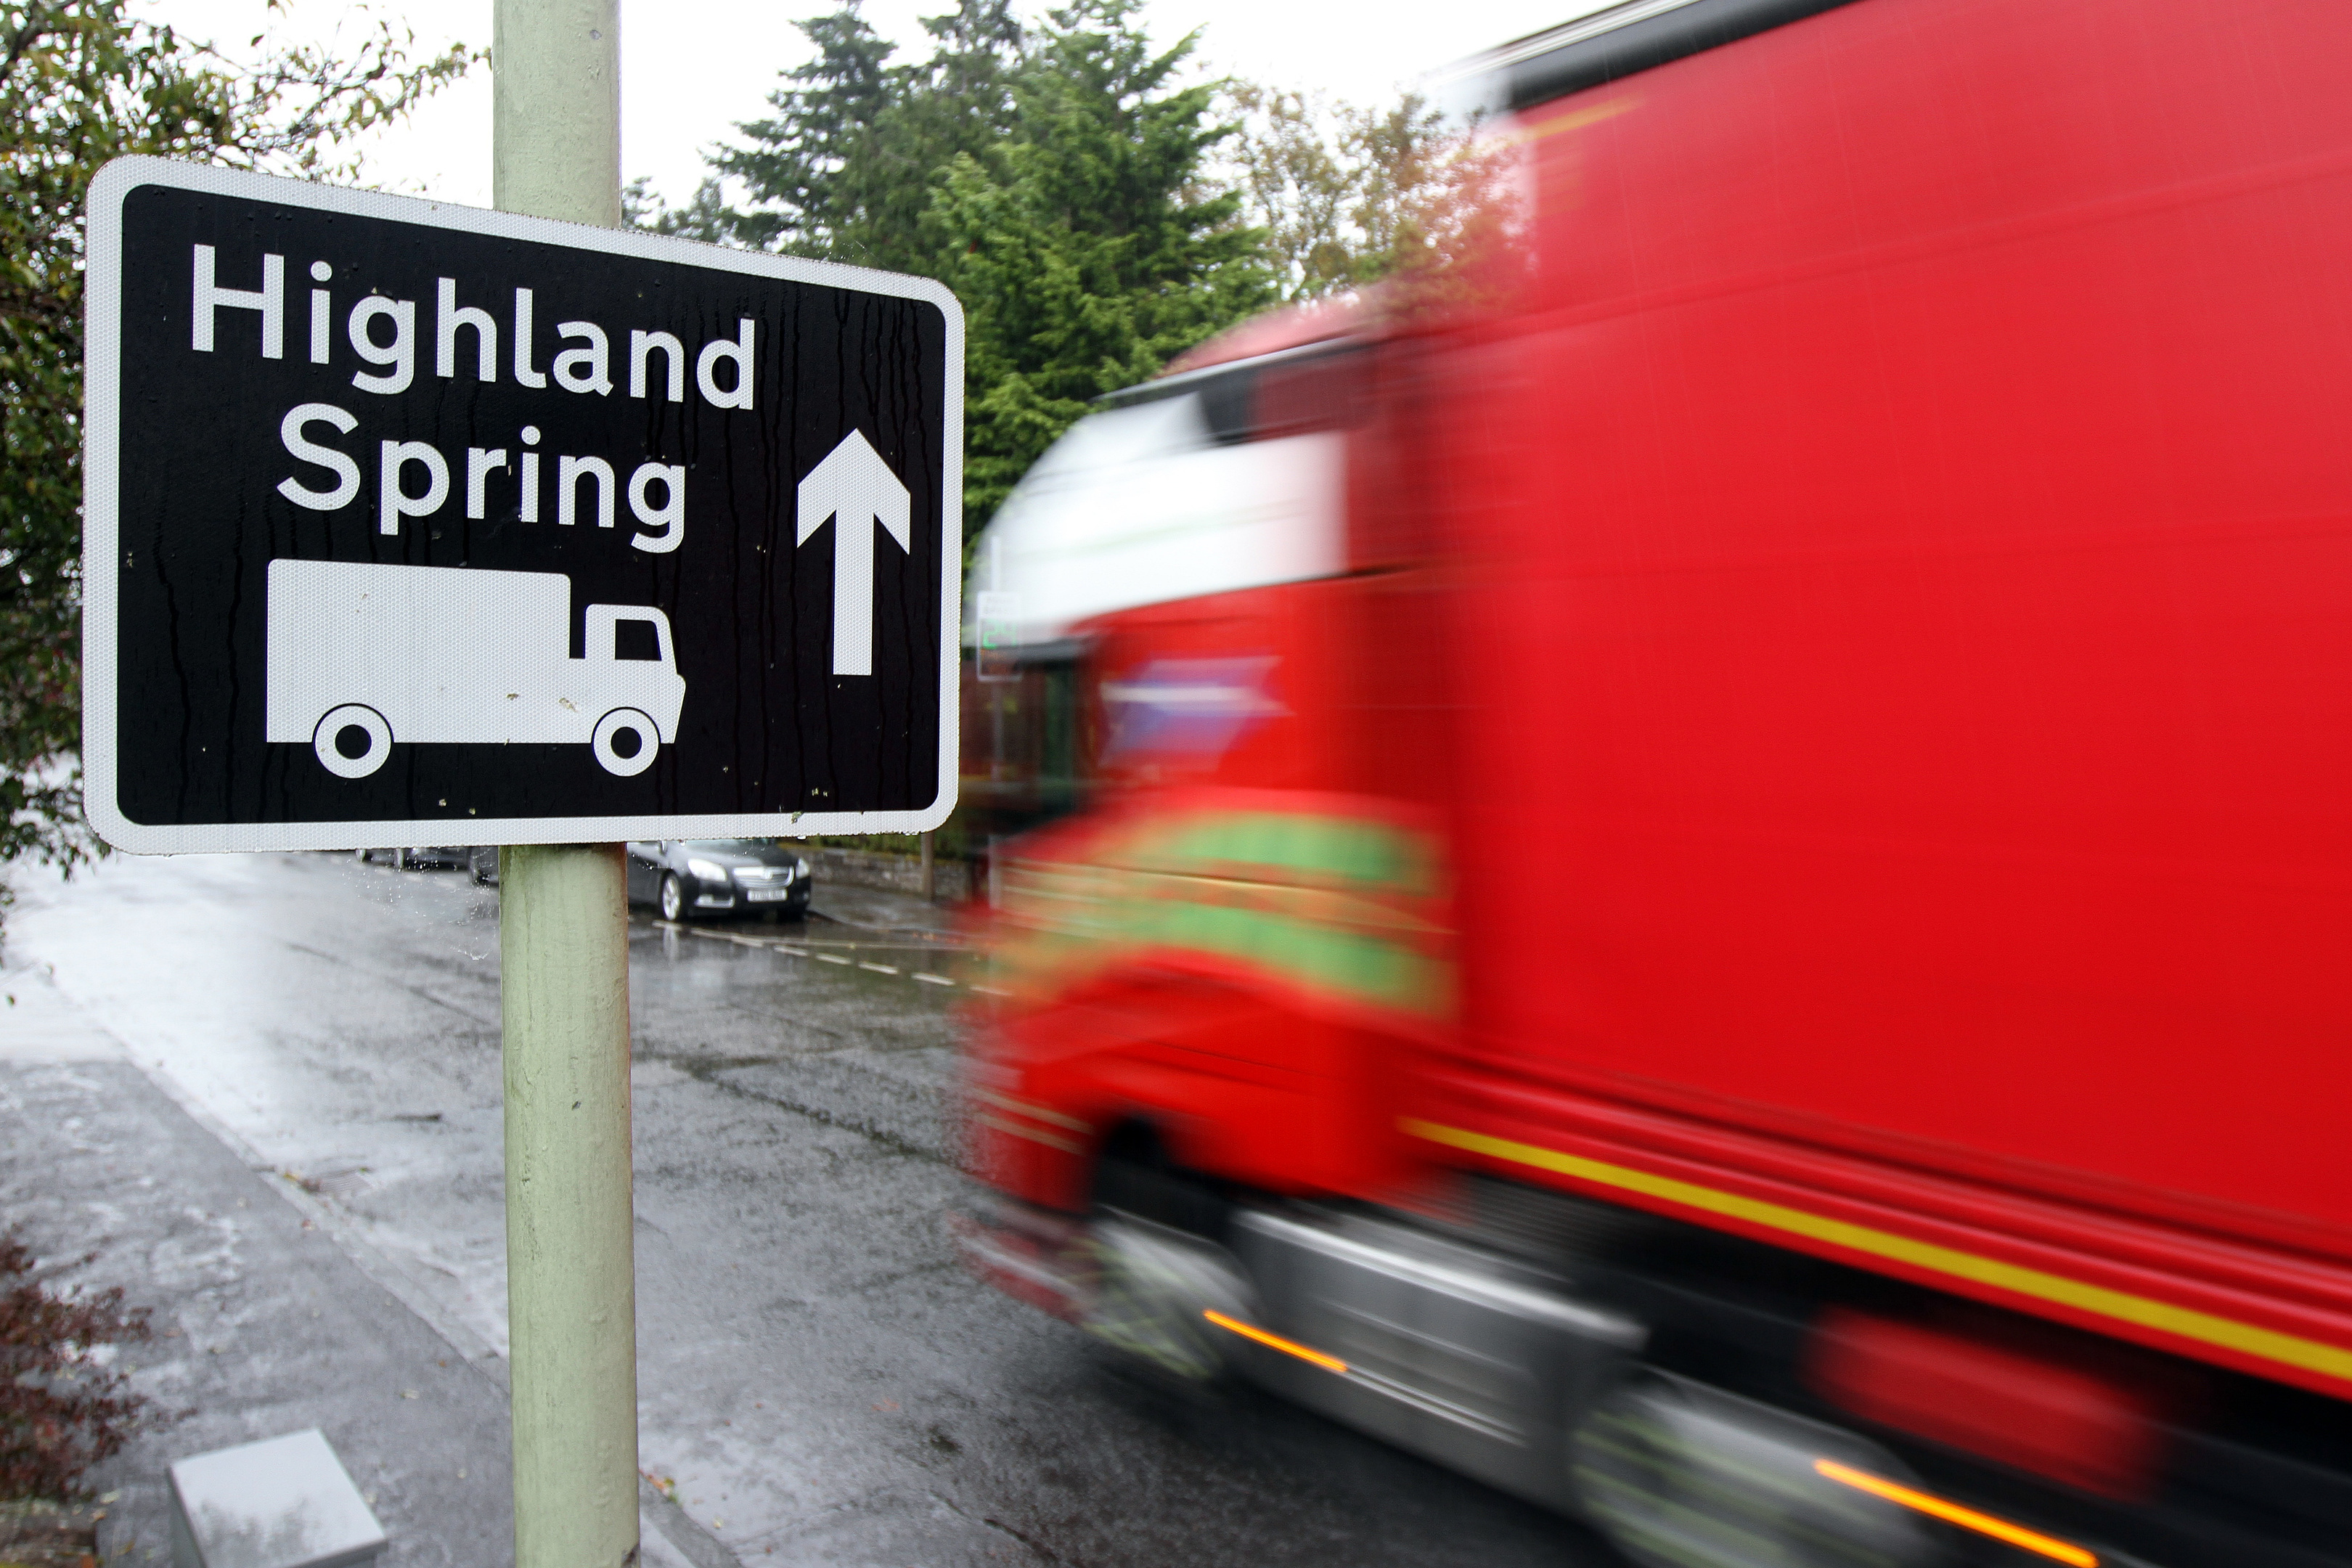 Residents of Blackford are losing patience over the noise nuisance of HGVs visiting the Highland Spring factory.